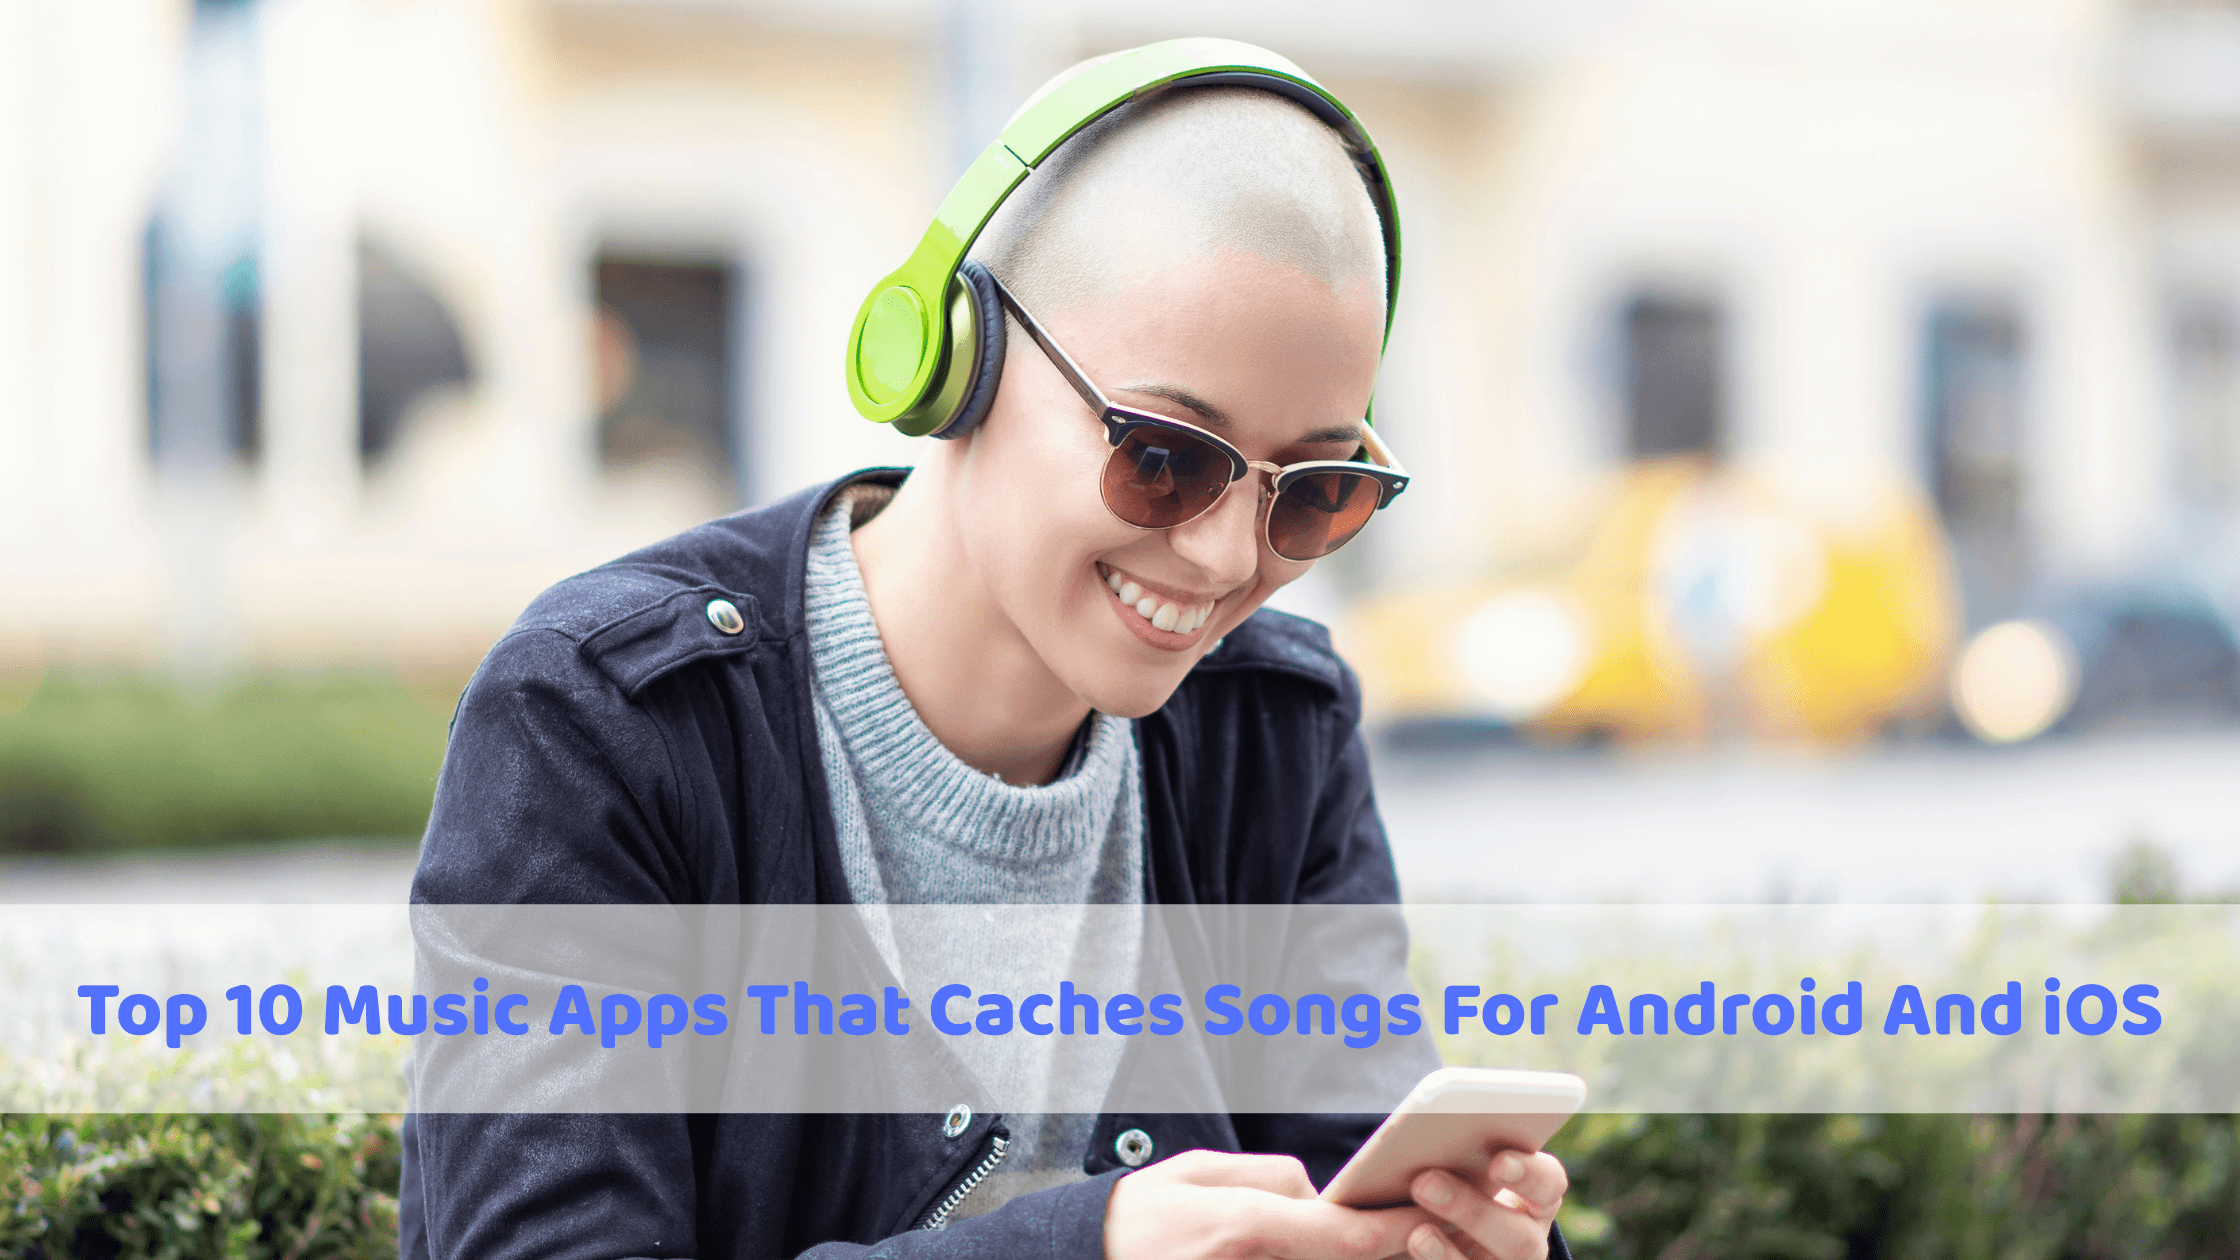 Top 10 Music Apps That Caches Songs For Android And iOS